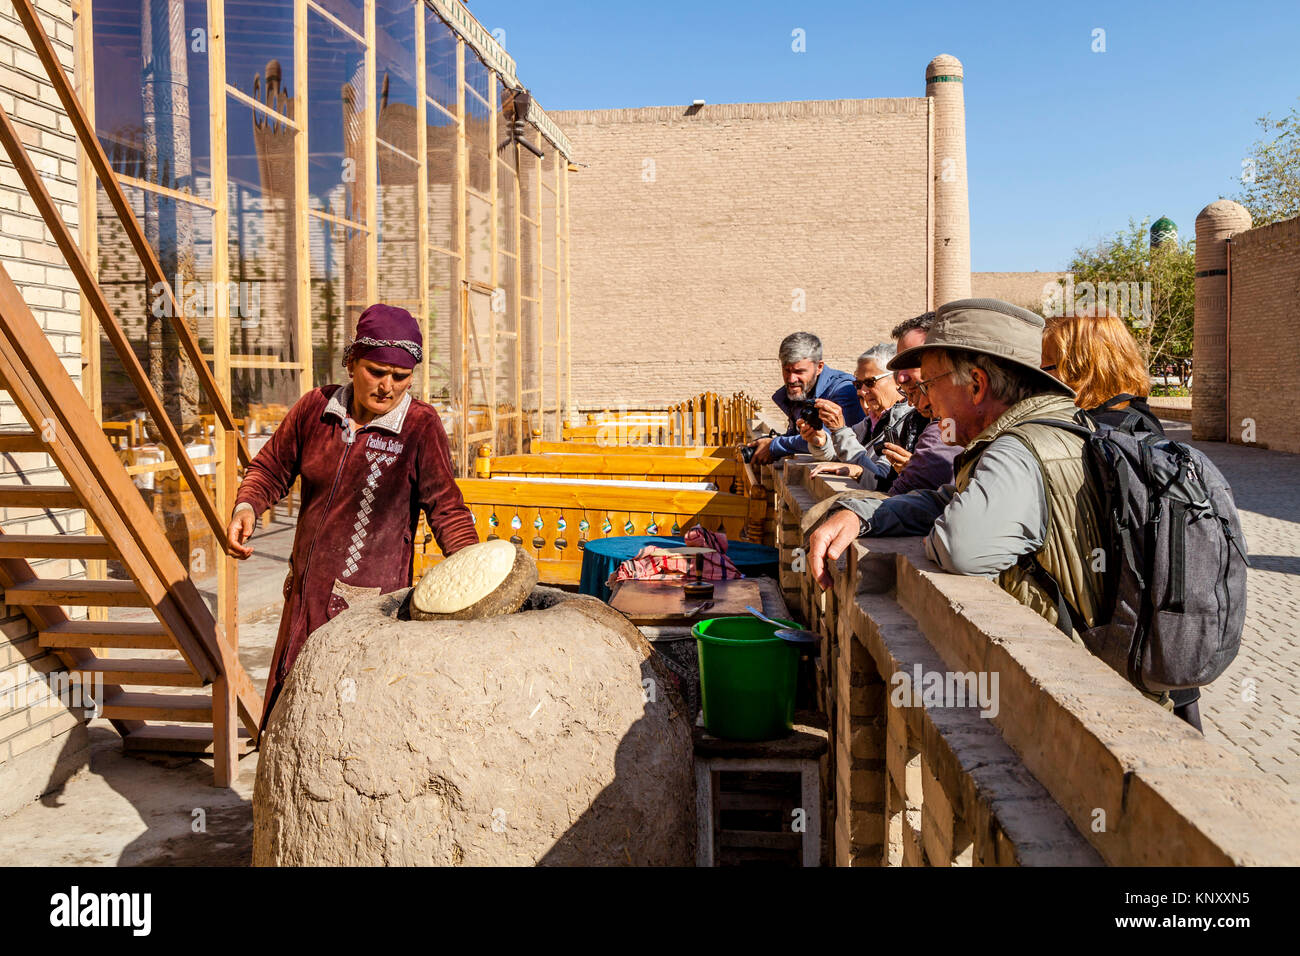 A Local Woman Bakes Bread In A Traditional Clay Oven Watched By A Group Of Tourists, Khiva, Uzbekistan Stock Photo